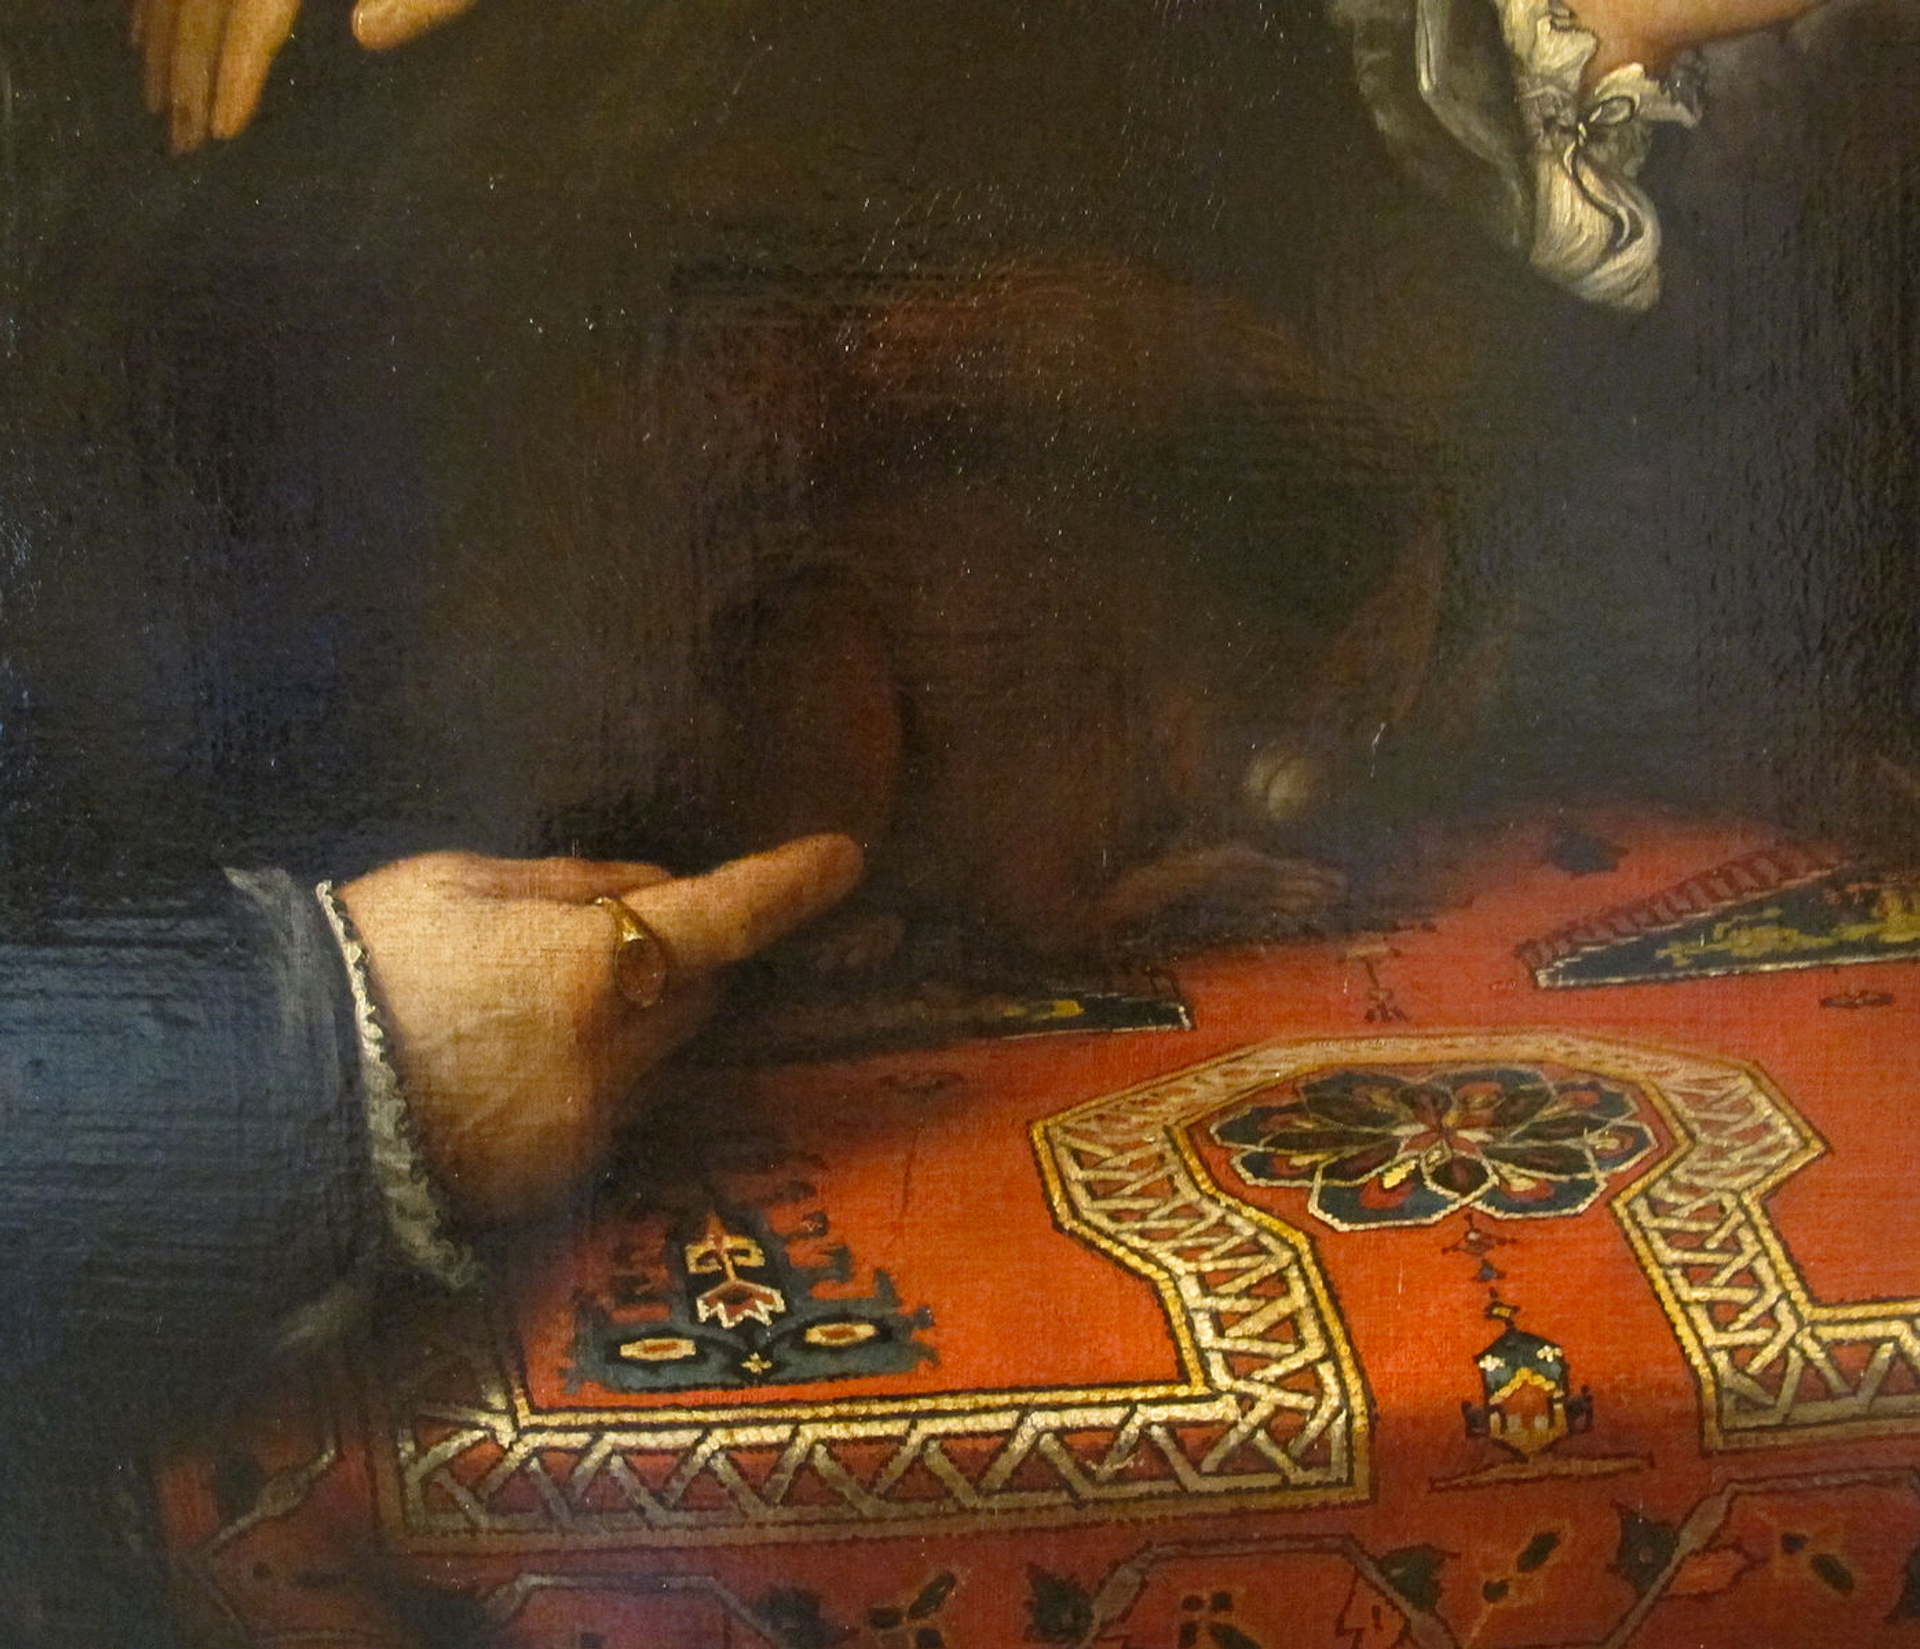 A close up of a Renaissance work by Lorenzo Lotto. It shows a man's hand resting on a bold patterned table cloth.